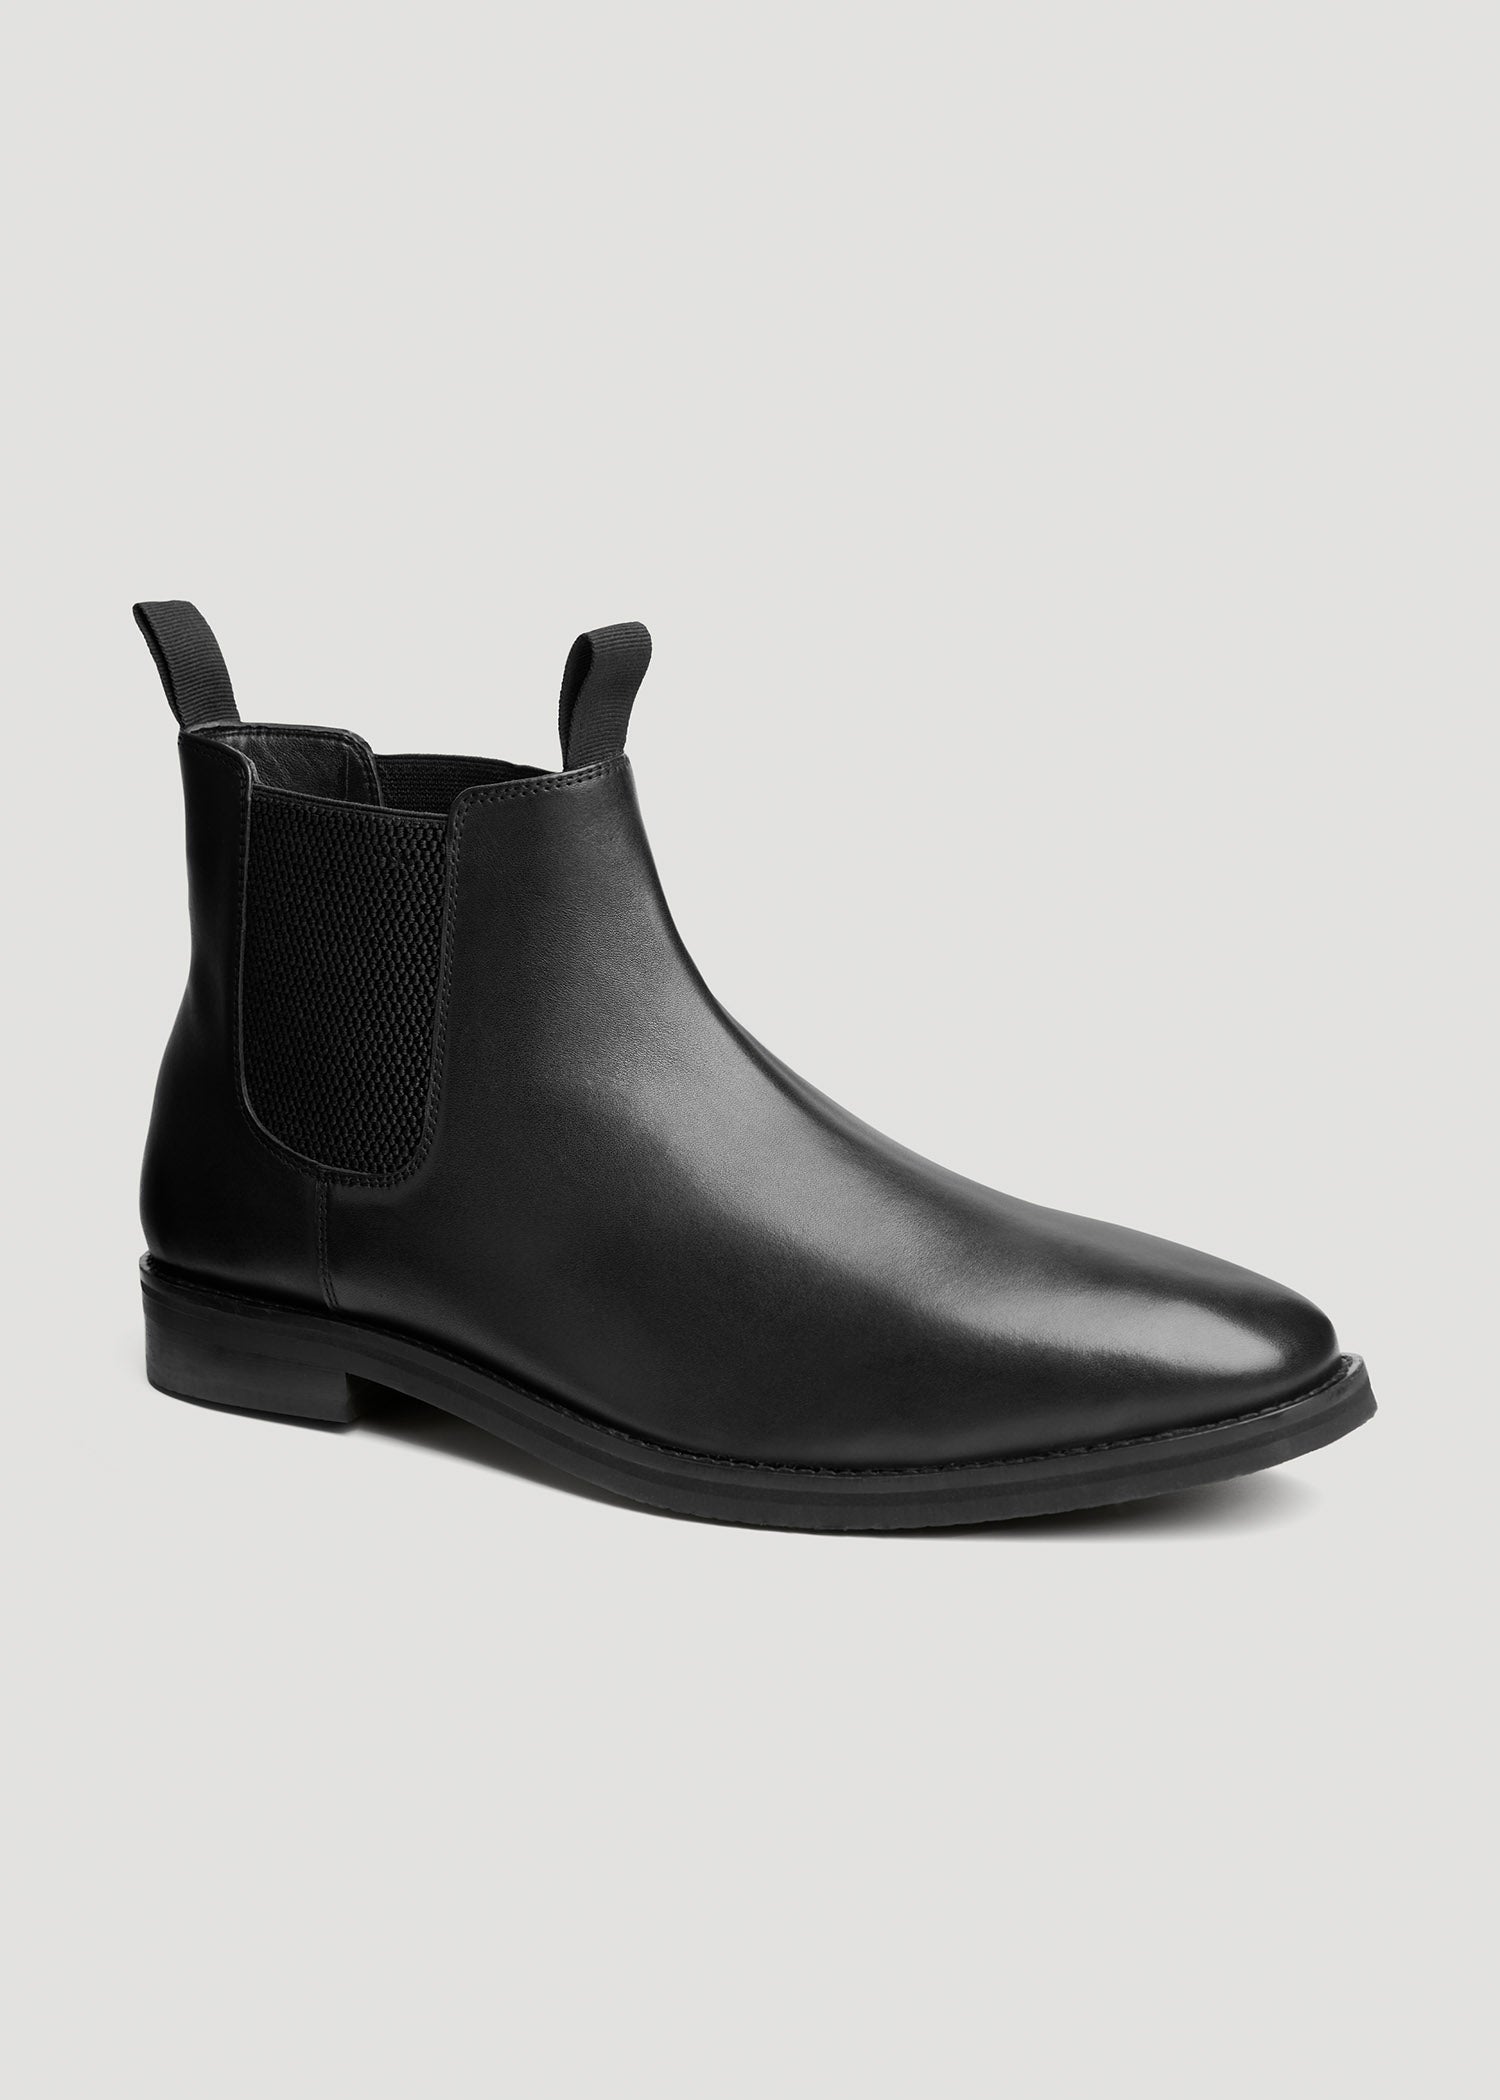 Men's Leather Chelsea Boots Size 13 to 15 | American Tall